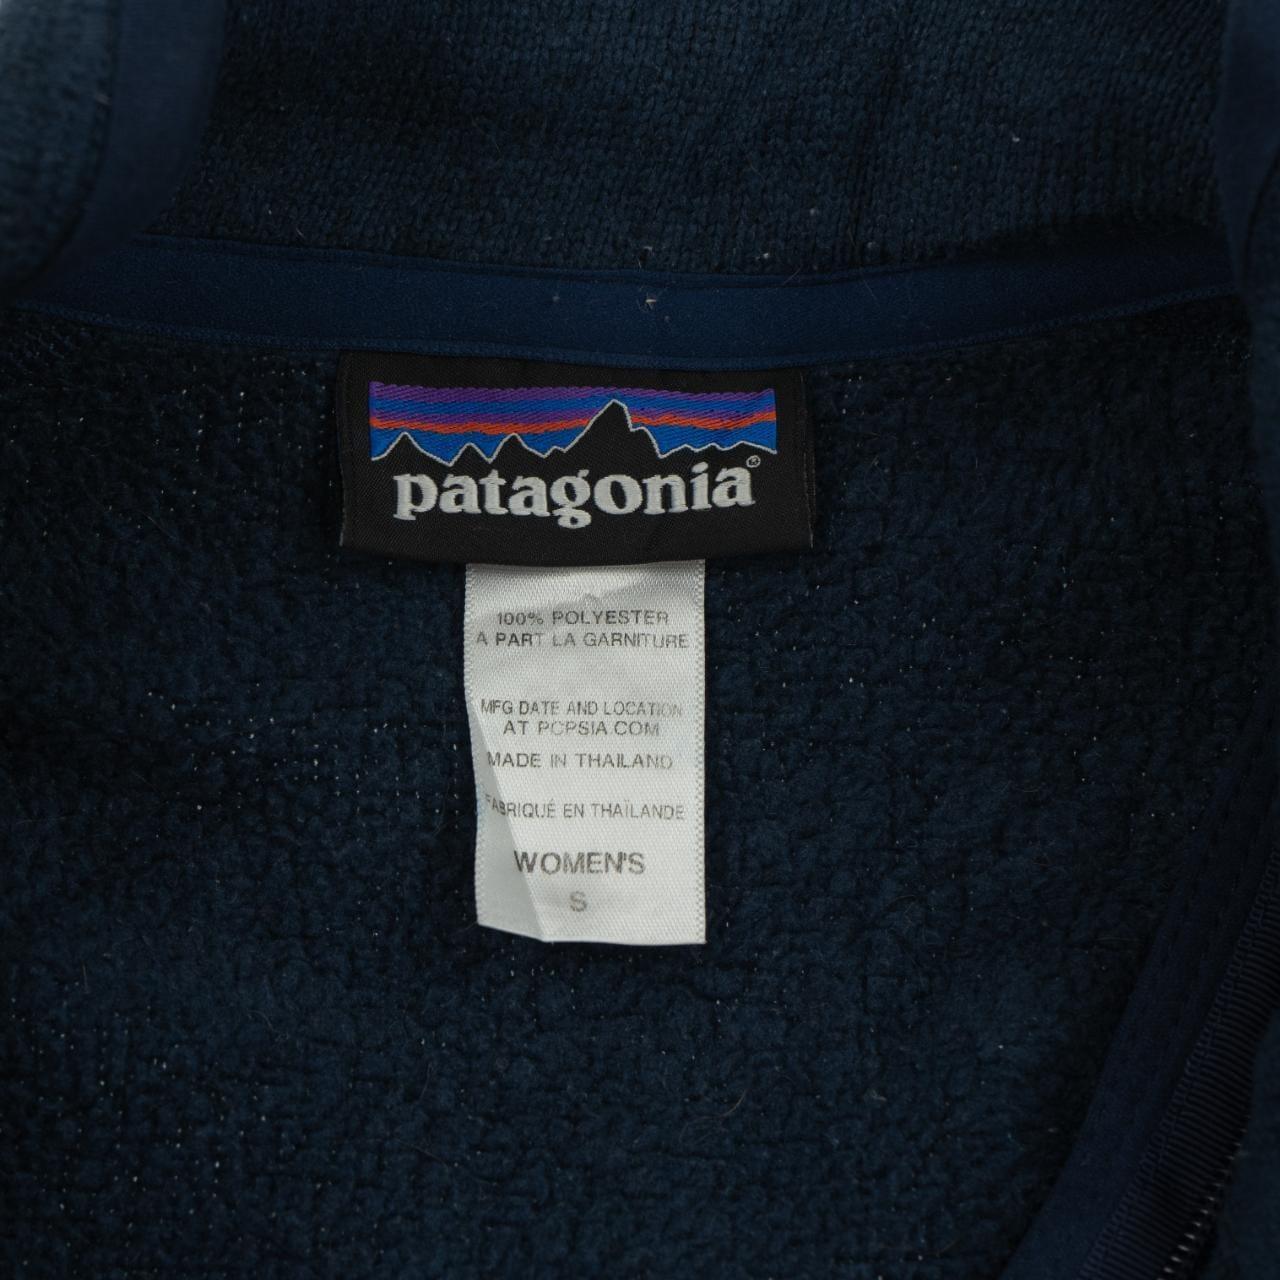 Vintage Patagonia Zip Up Jacket Womens Size S - Known Source